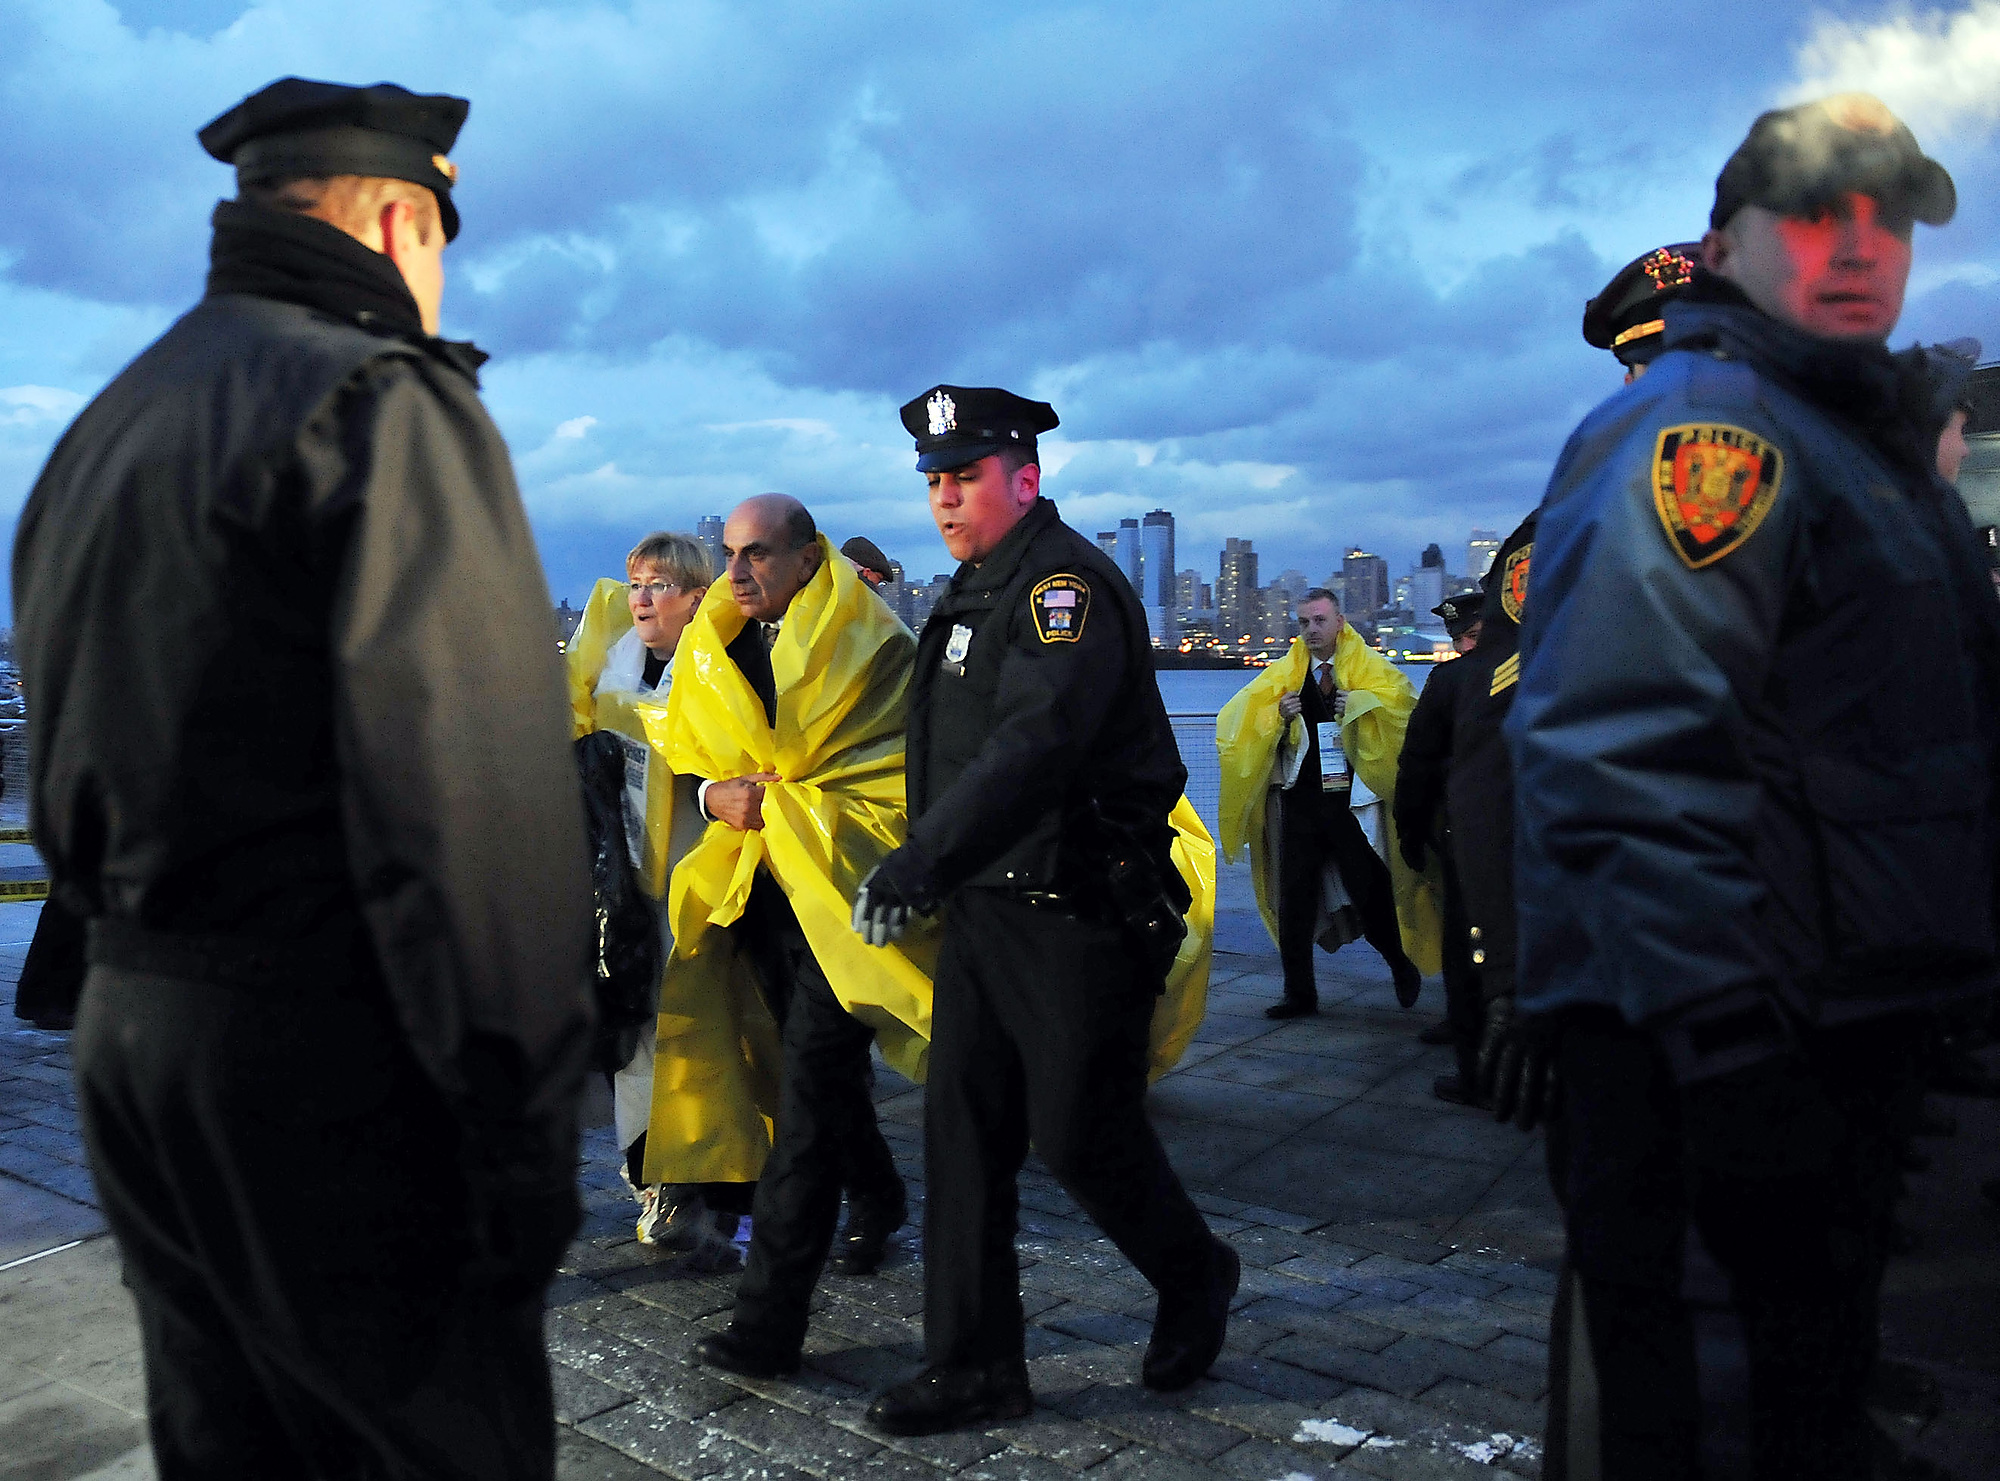 Survivors of the US Airways Flight 1549 bound for Charlotte, N.C.--which made an emergency landing on the Hudson River after both engines failed when the plane struck a flock of geese during takeoff minutes earlier at LaGuardia Airport--are escorted by police from the NY Waterway Port Imperial ferry terminal, to board a bus that will take them to the senior citizen nutrition center to be reunited with their loved ones. (Reena Rose Sibayan | The Jersey Journal)